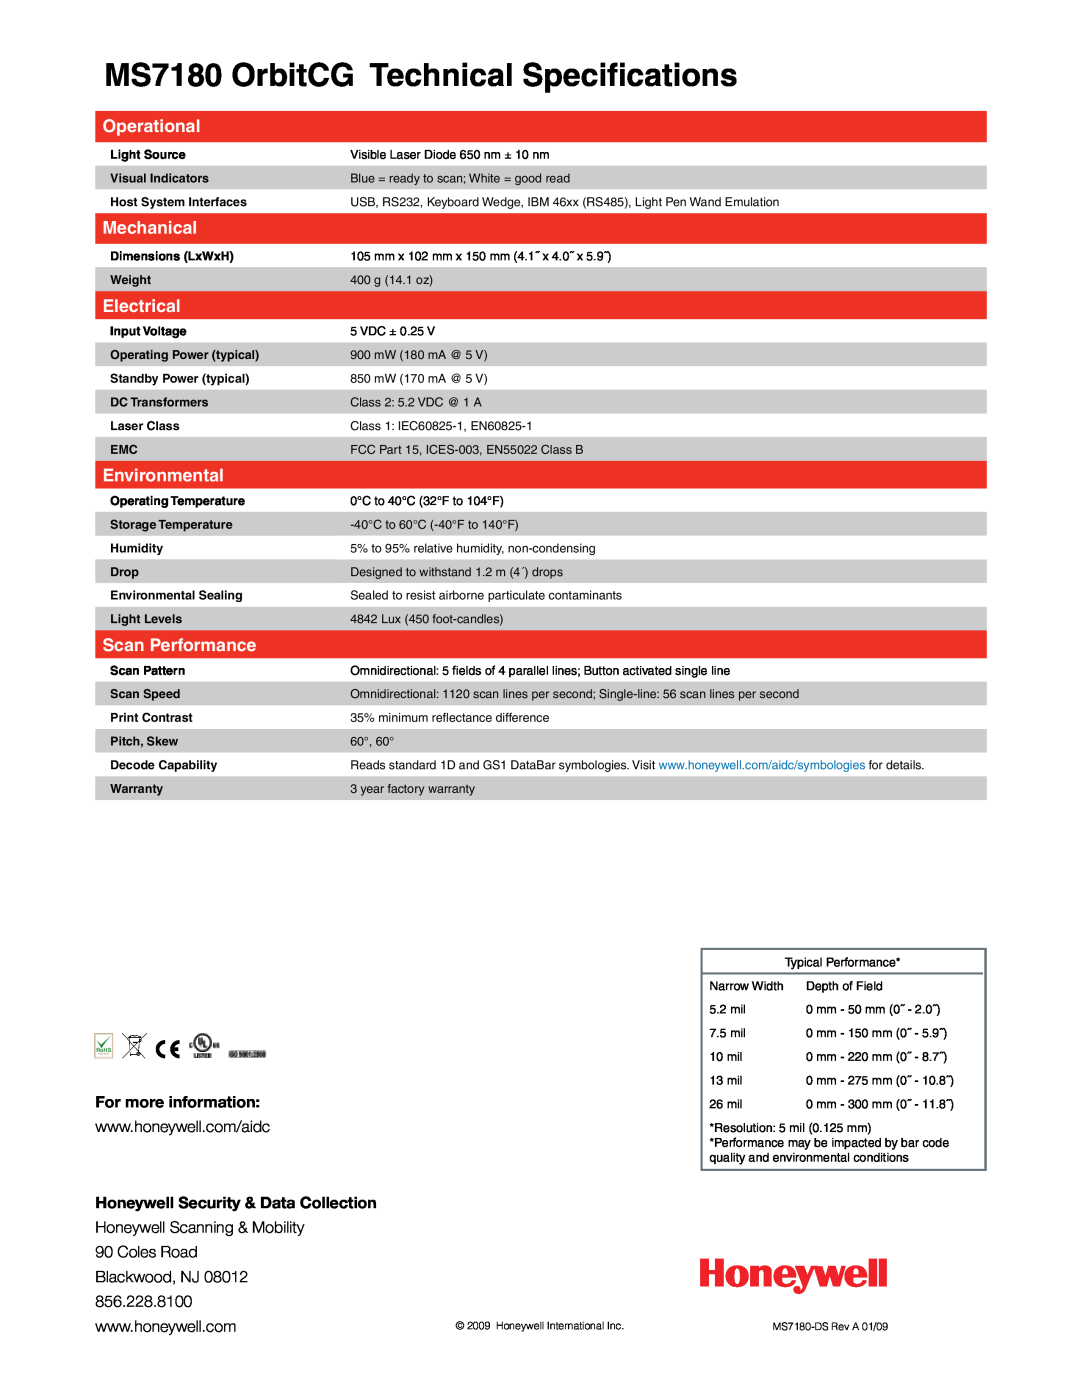 Honeywell MS7180 OrbitCG Technical Specifications, Operational, Mechanical, Electrical, Environmental, Scan Performance 